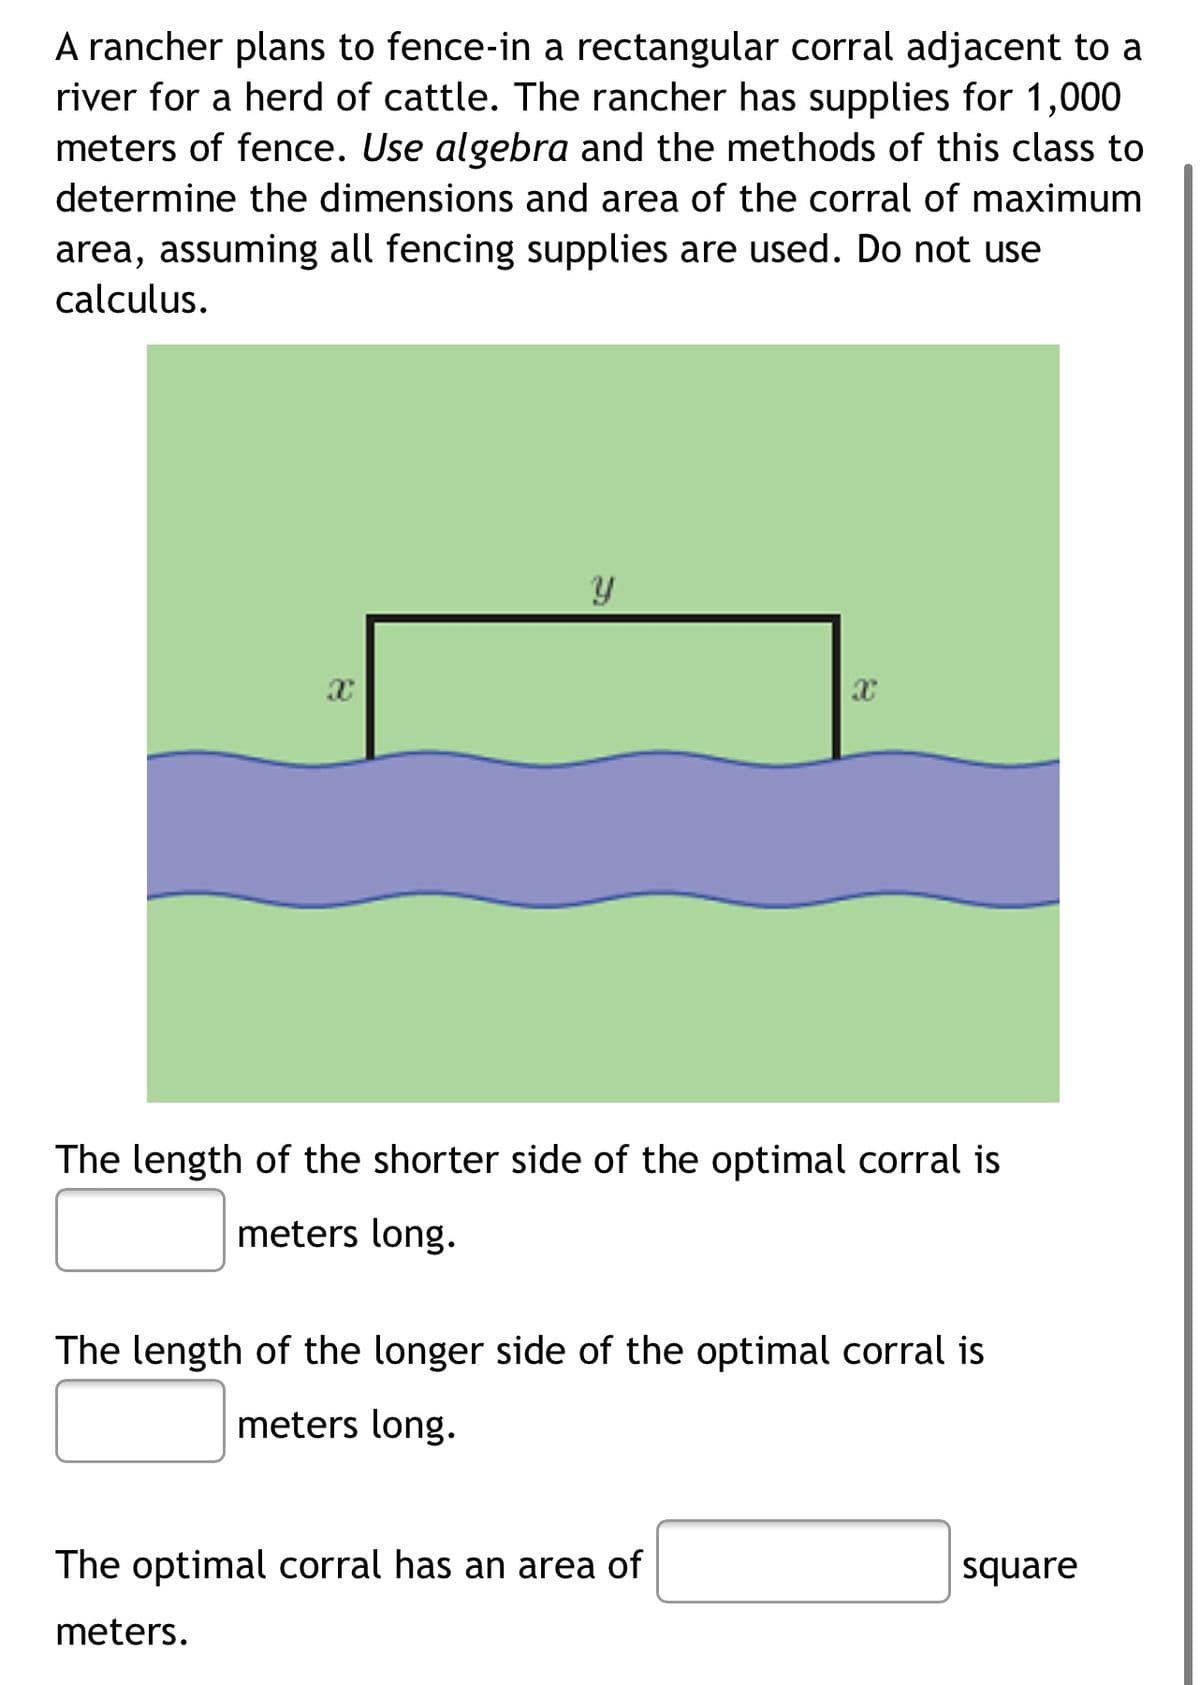 A rancher plans to fence-in a rectangular corral adjacent to a
river for a herd of cattle. The rancher has supplies for 1,000
meters of fence. Use algebra and the methods of this class to
determine the dimensions and area of the corral of maximum
area, assuming all fencing supplies are used. Do not use
calculus.
The length of the shorter side of the optimal corral is
meters long.
The length of the longer side of the optimal corral is
meters long.
The optimal corral has an area of
square
meters.
